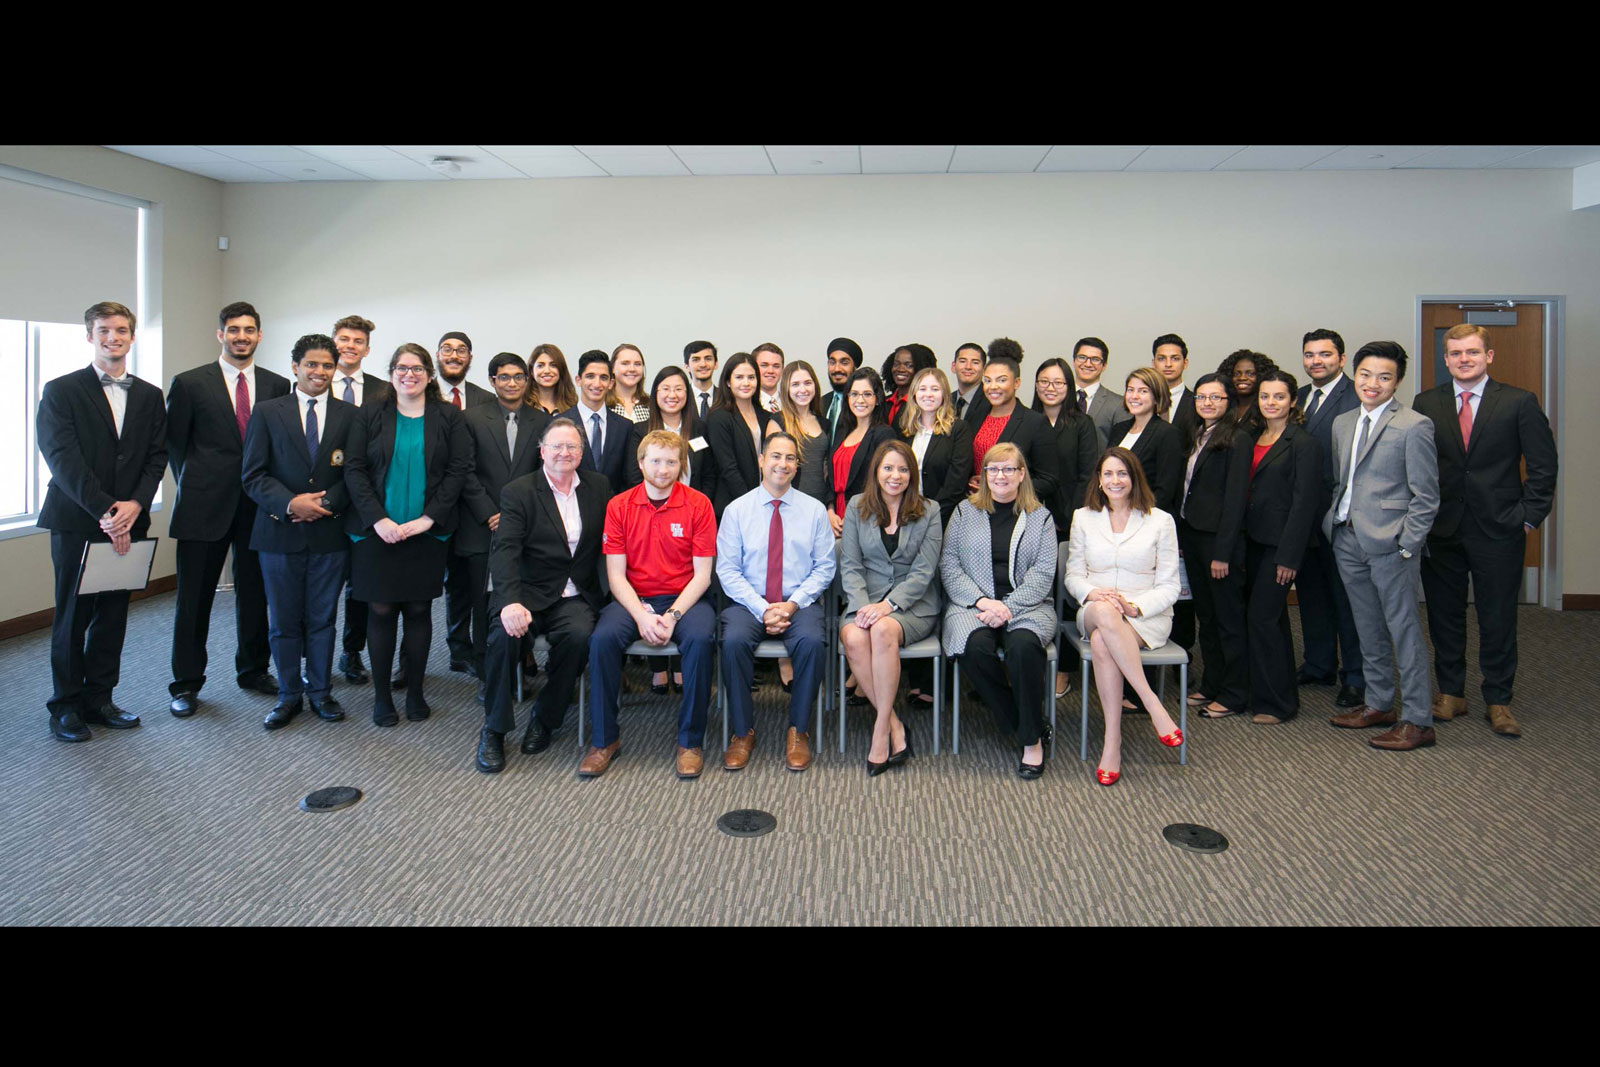 MSACCY Mentor Program at the Bauer College of Business at the University of Houston